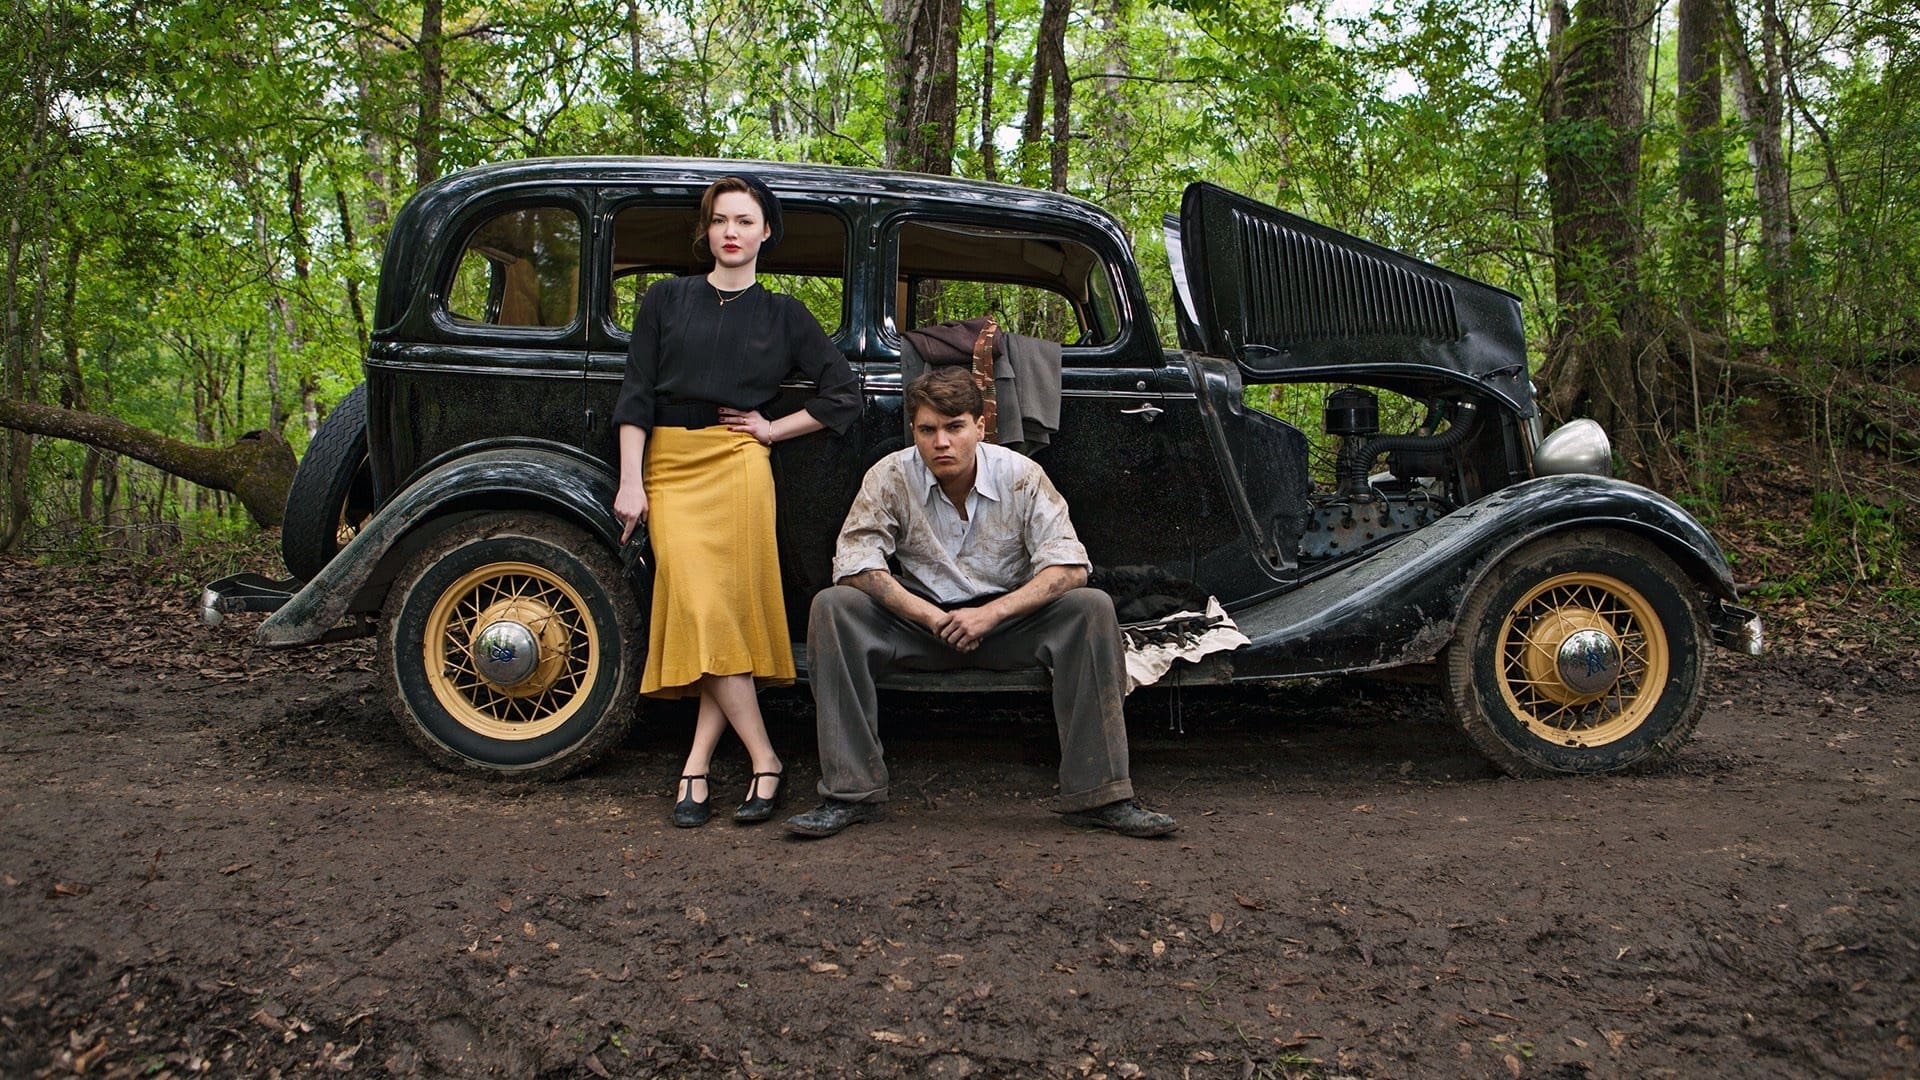 Watch Bonnie and Clyde Online